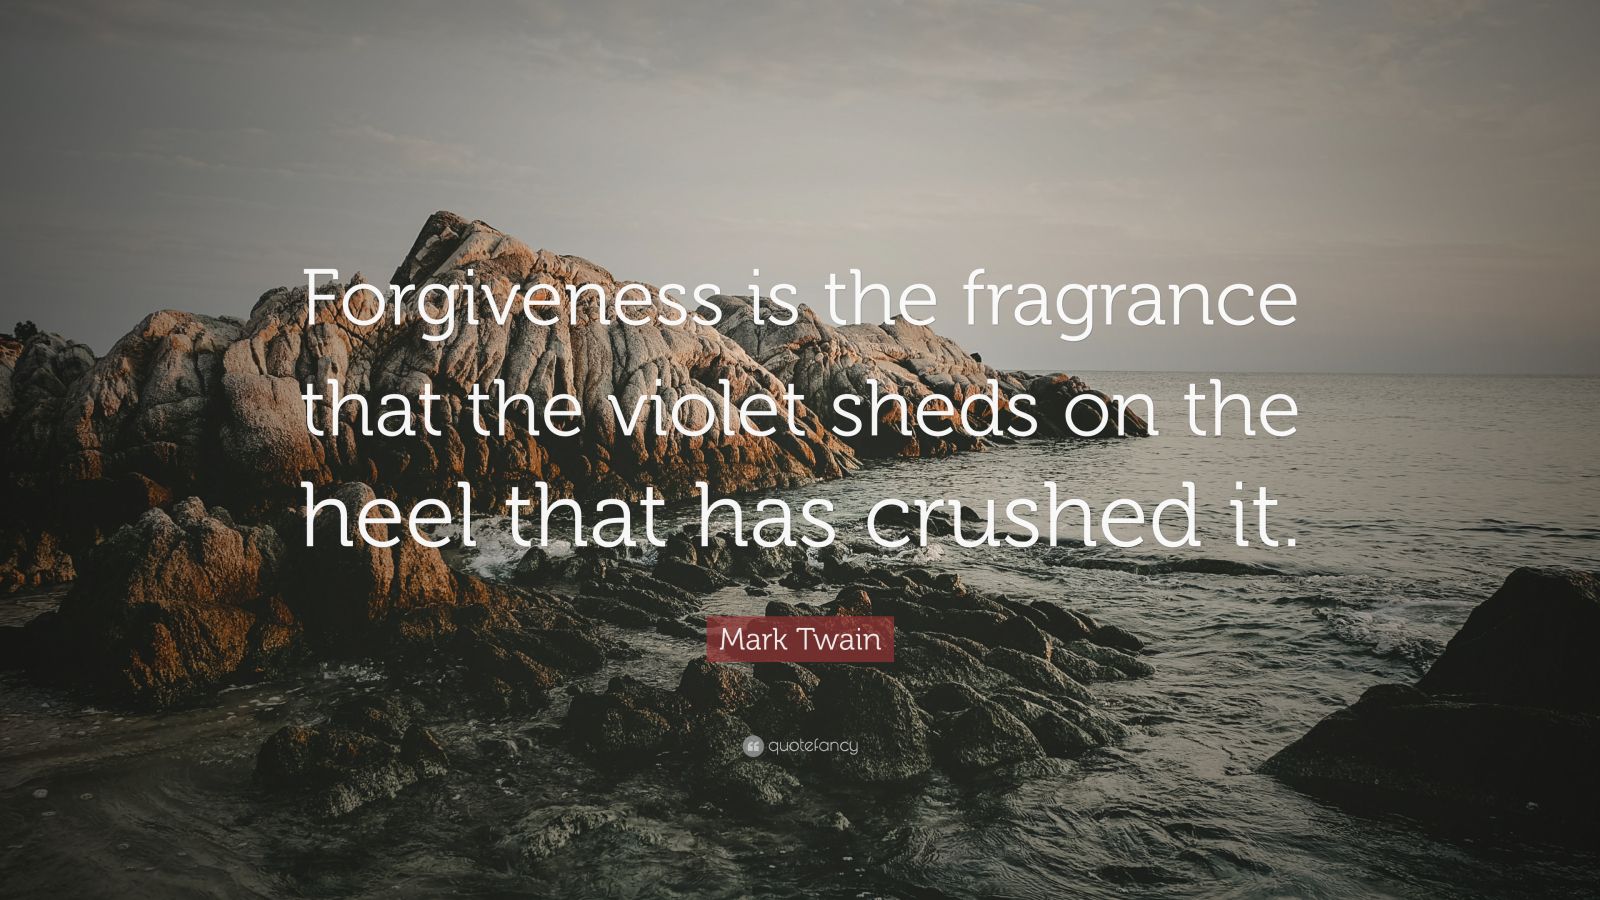 Mark Twain Quote: "Forgiveness is the fragrance that the violet sheds on the heel that has ...